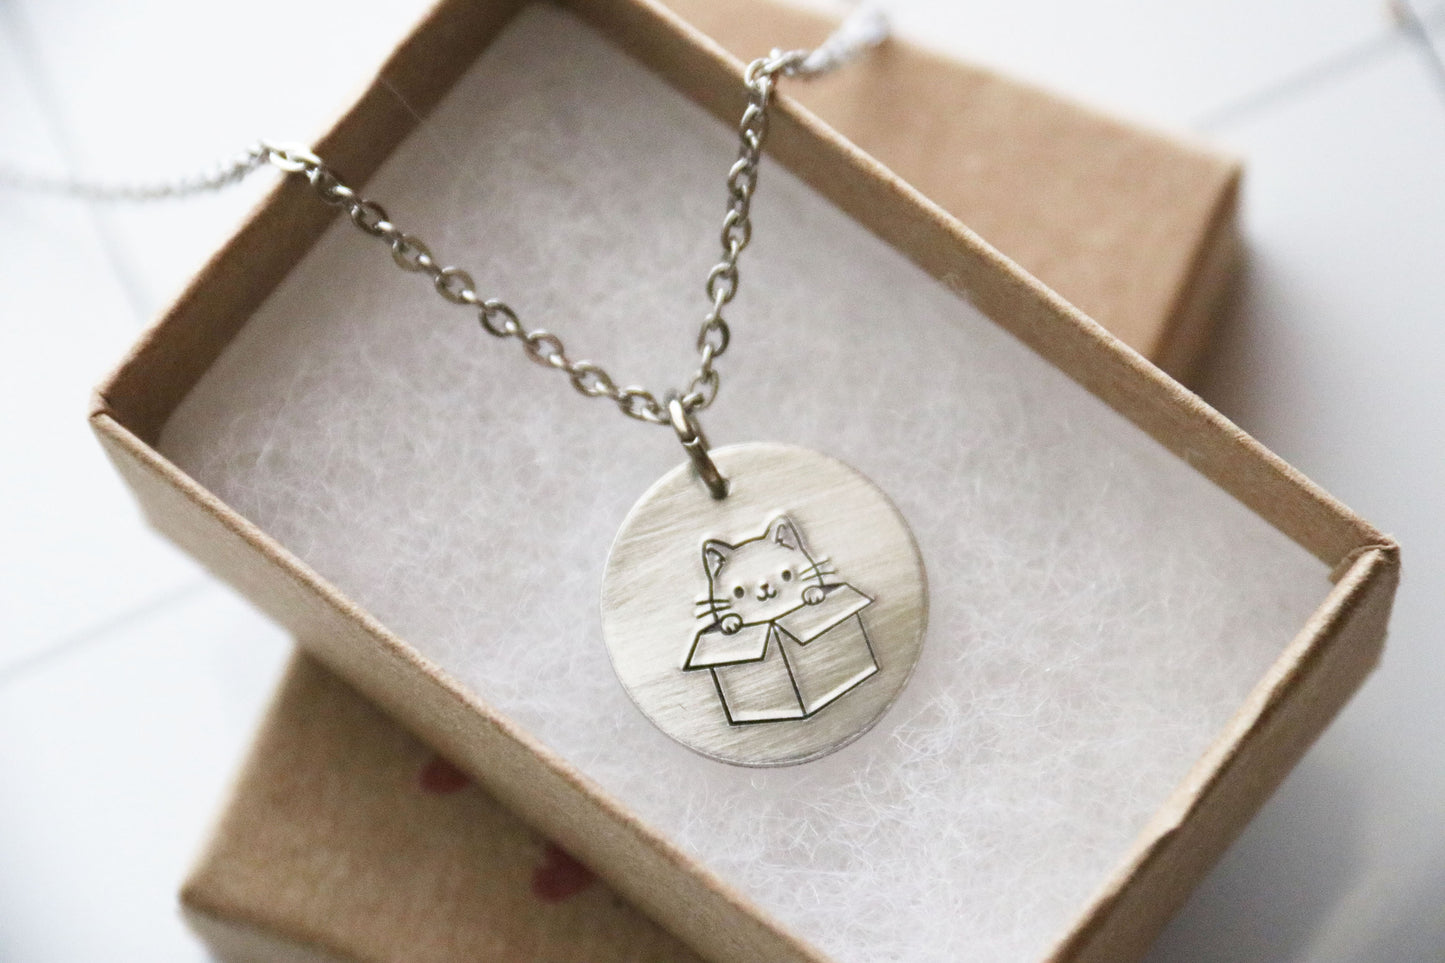 Cat in Box Necklace Hand Stamped, Personalized Optional